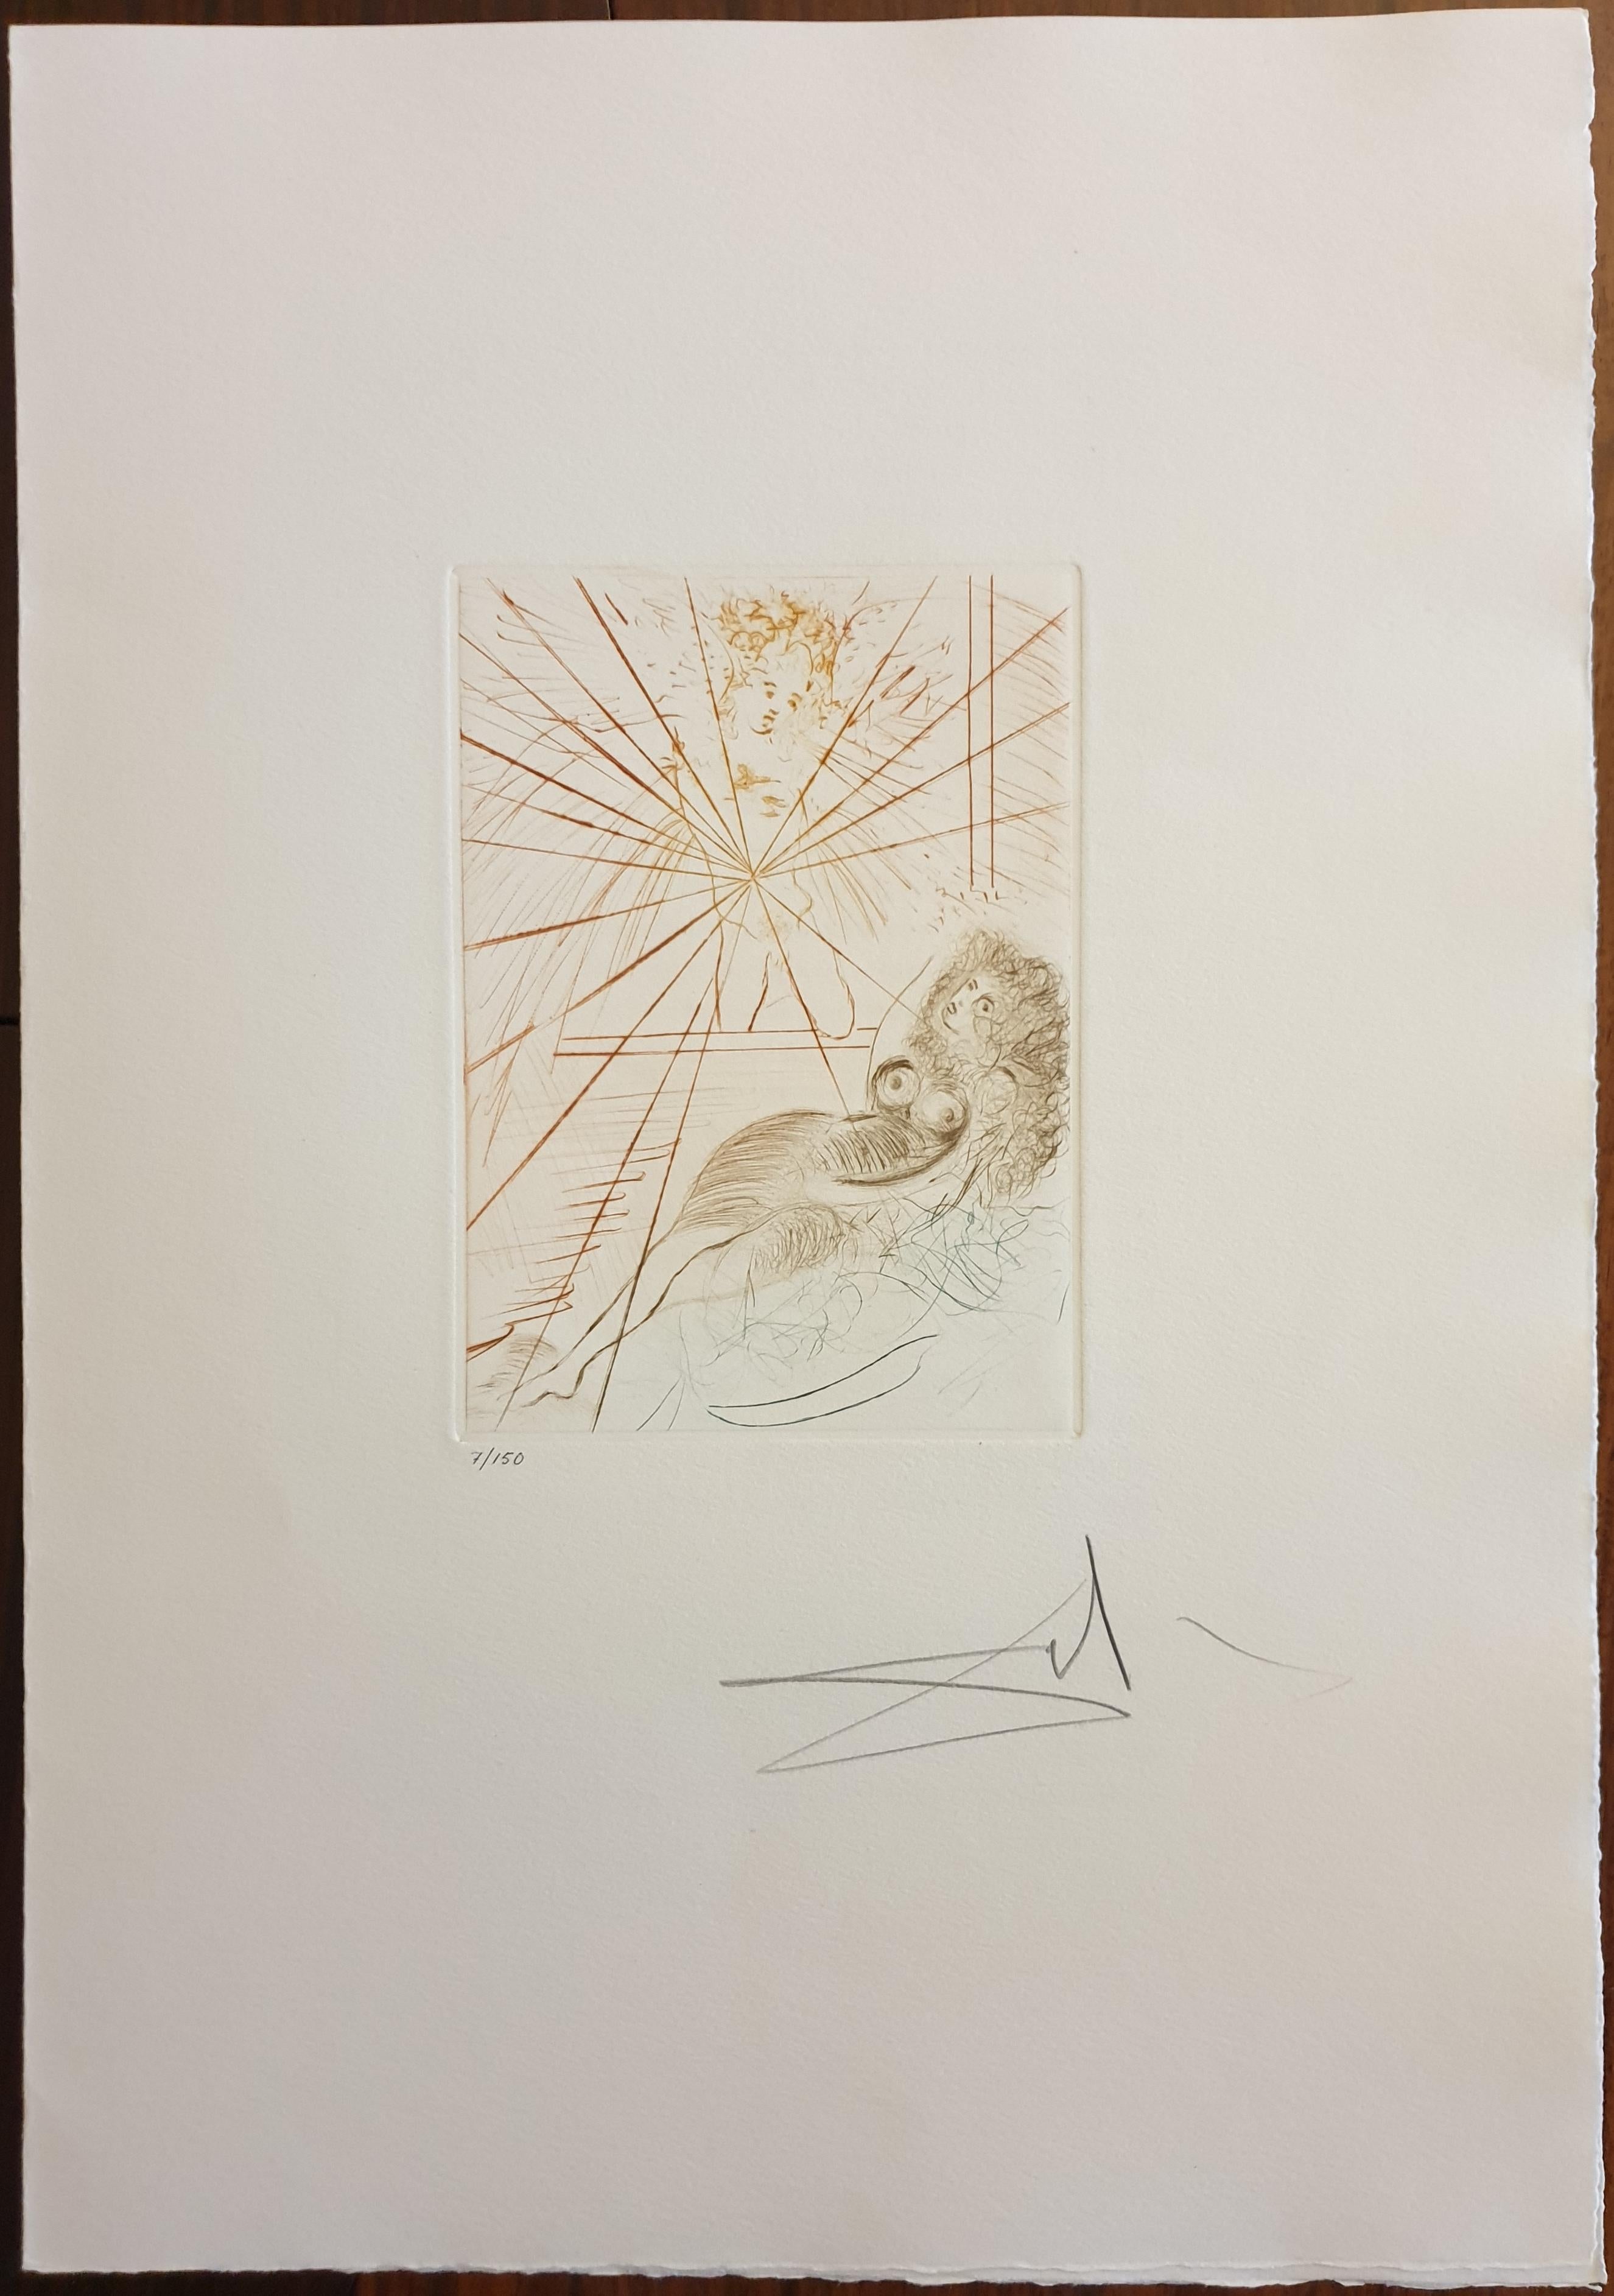 L'Ange Gabriel is an etching and aquatint realized in 1972.

The artwork represents an episode of a novel included in Boccaccio's Decameron.

Limited edition number 48/125 prints on Arches paper, numbered and hand signed in pencil by the